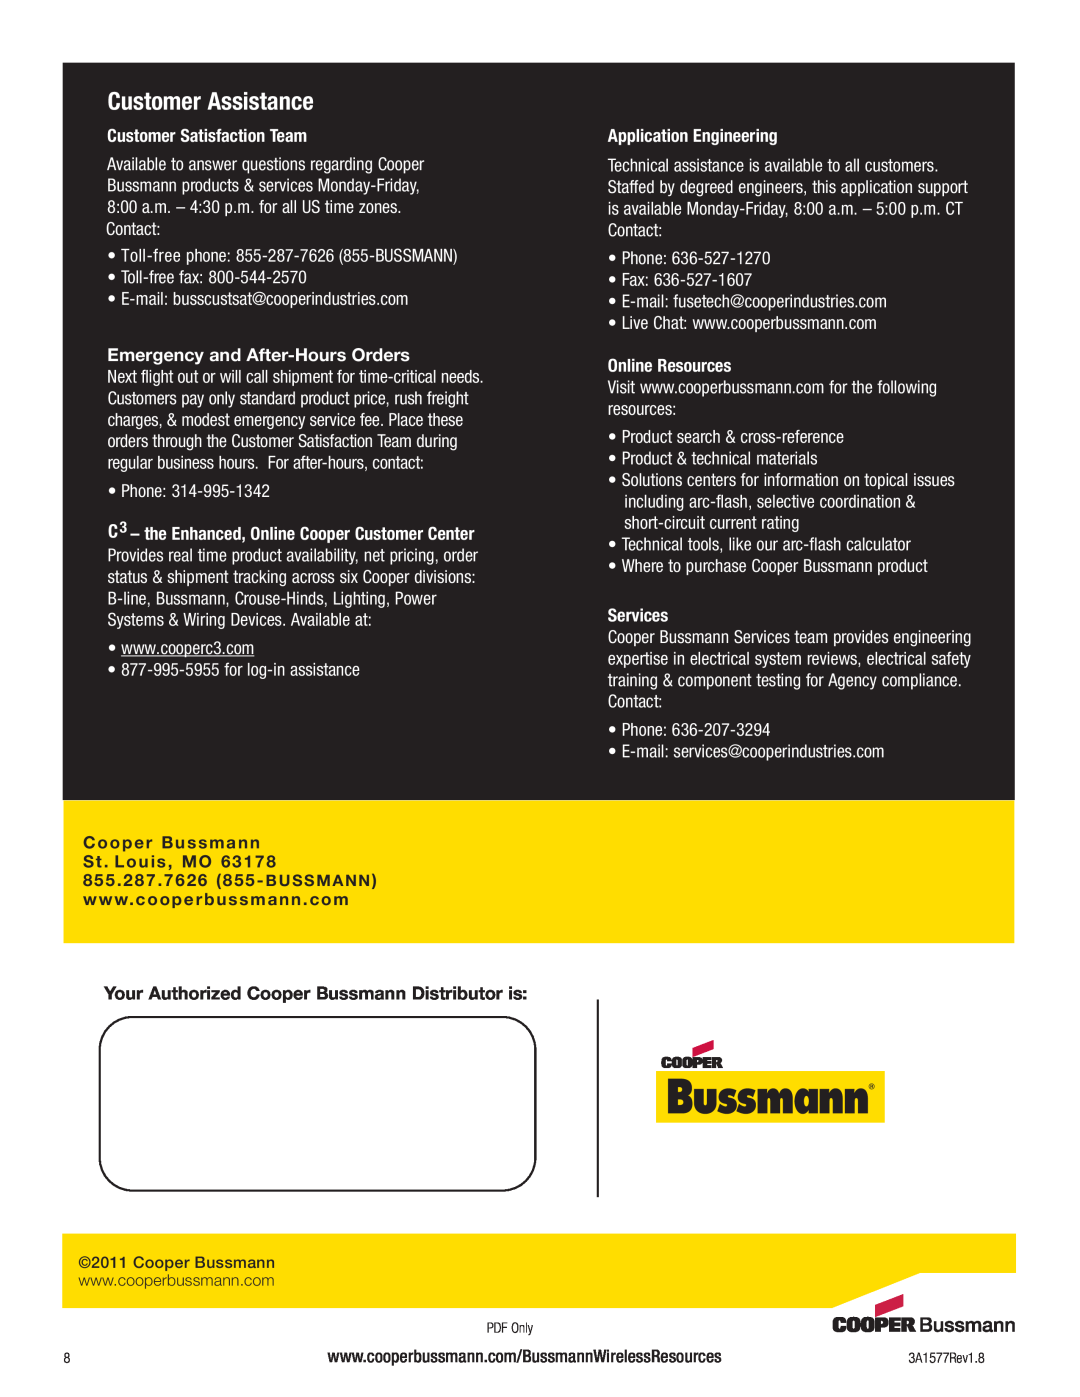 Cooper Bussmann BU-905U-L-T Customer Assistance, Customer Satisfaction Team, Emergency and After-HoursOrders, Services 